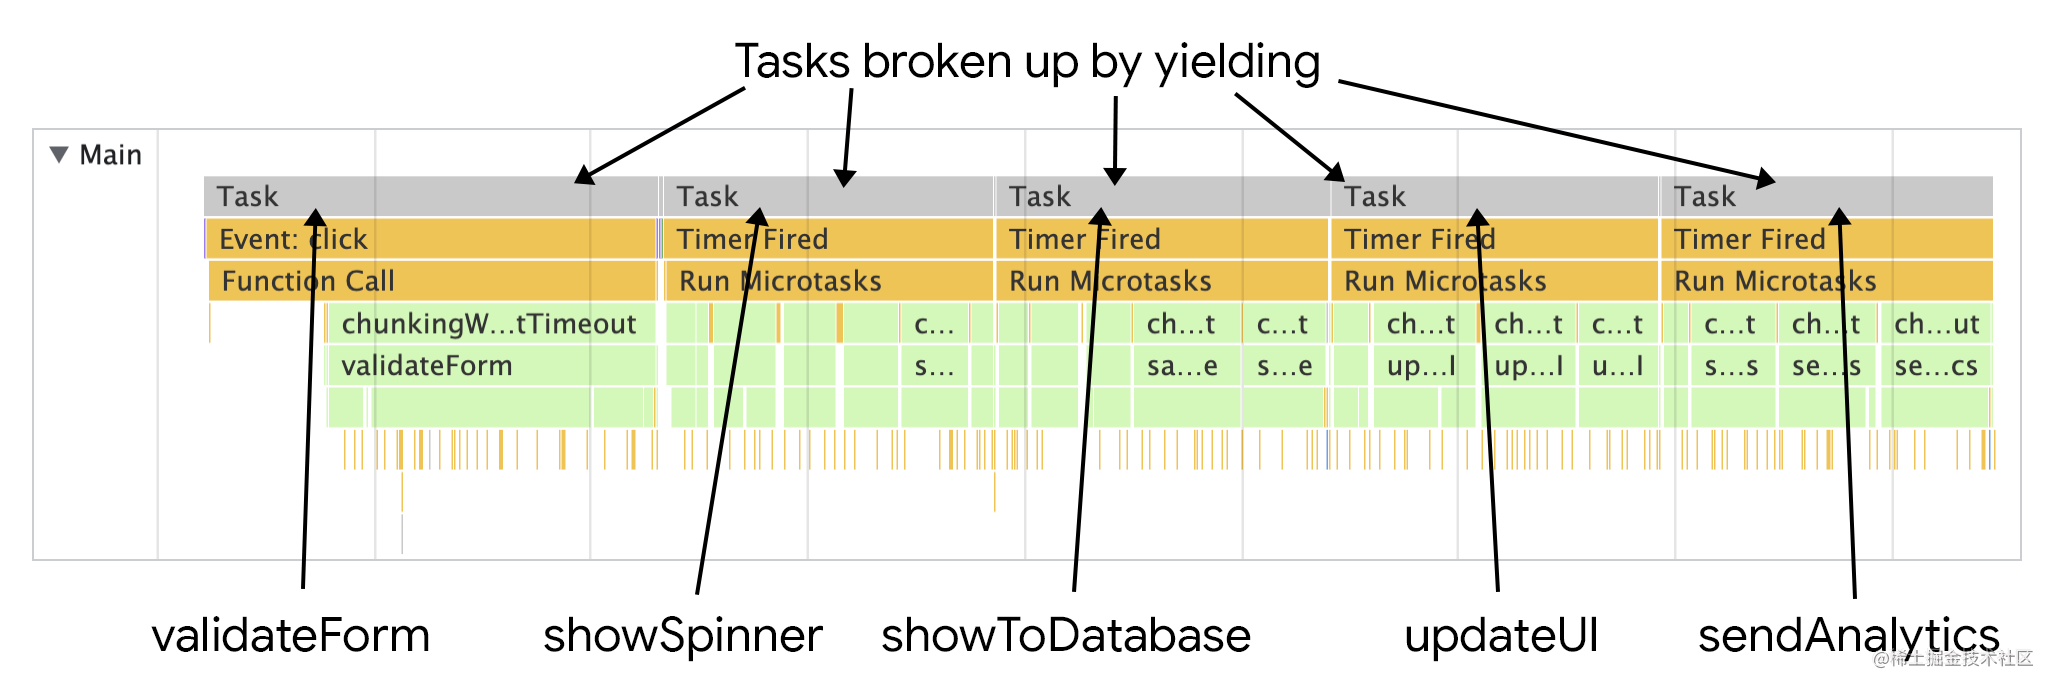 The same saveSettings function depicted in Chrome's performance profiler, only with yielding. The result is the once-monolithic task is now broken up into five separate tasksone for each function.